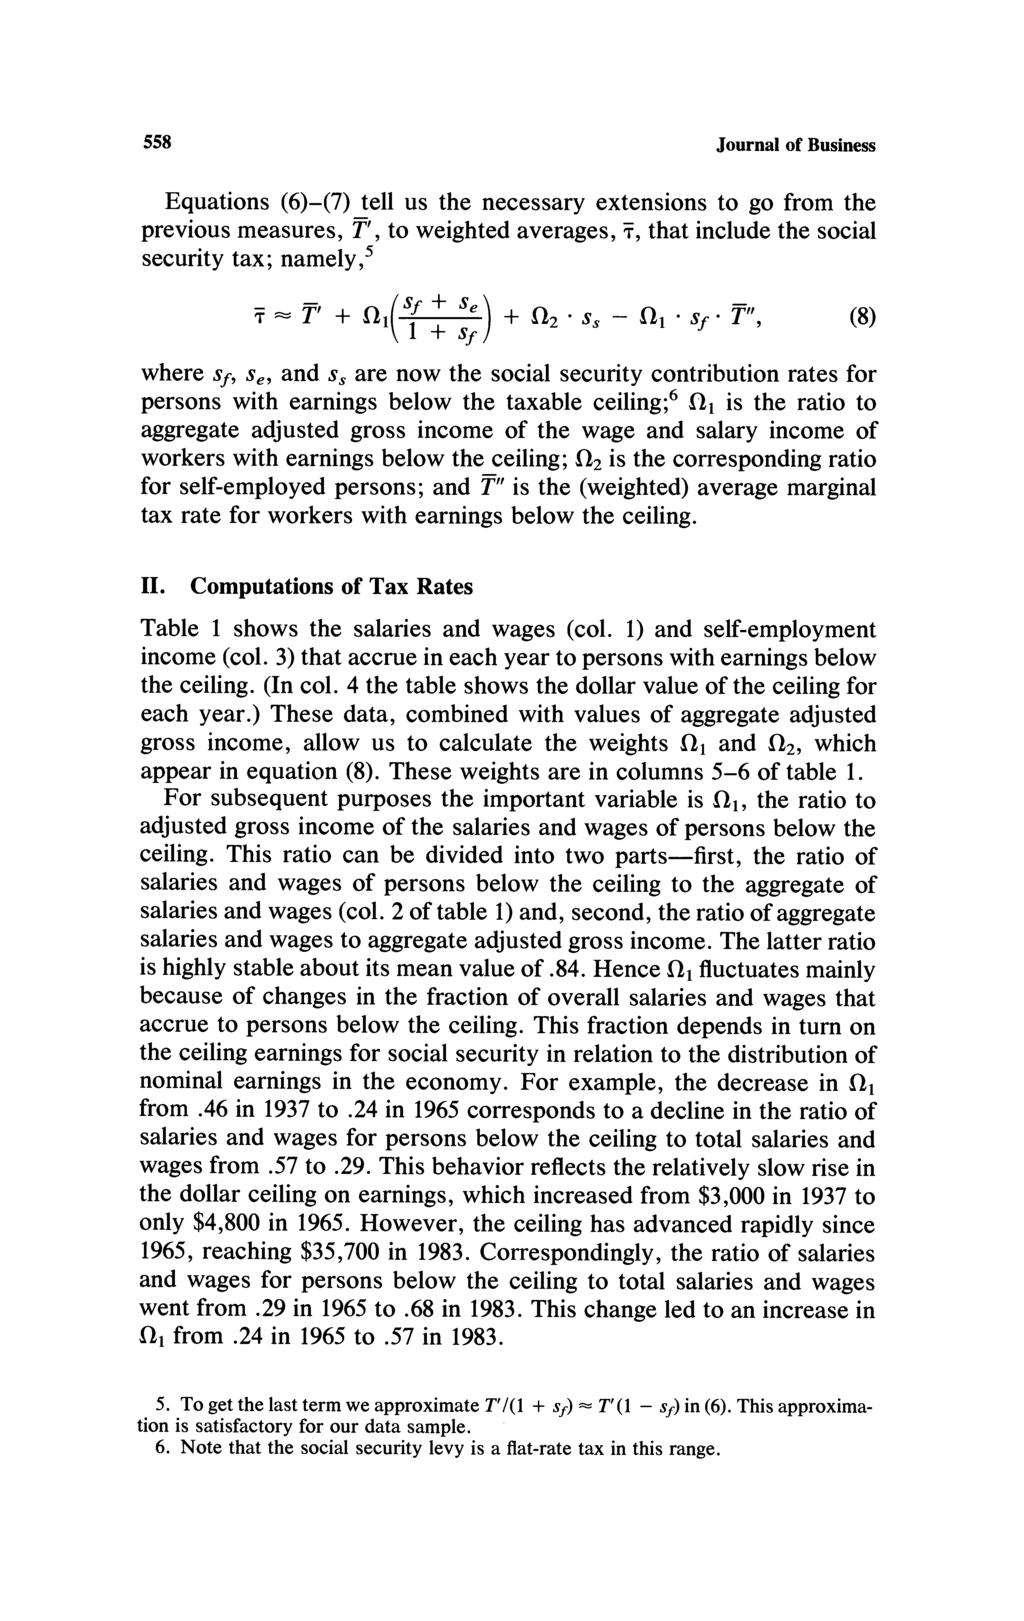 558 Journal of Business Equations (6)-(7) tell us the necessary extensions to go from the previous measures, T', to weighted averages, T, that include the social security tax; namely,5 T T + I ) + Q2